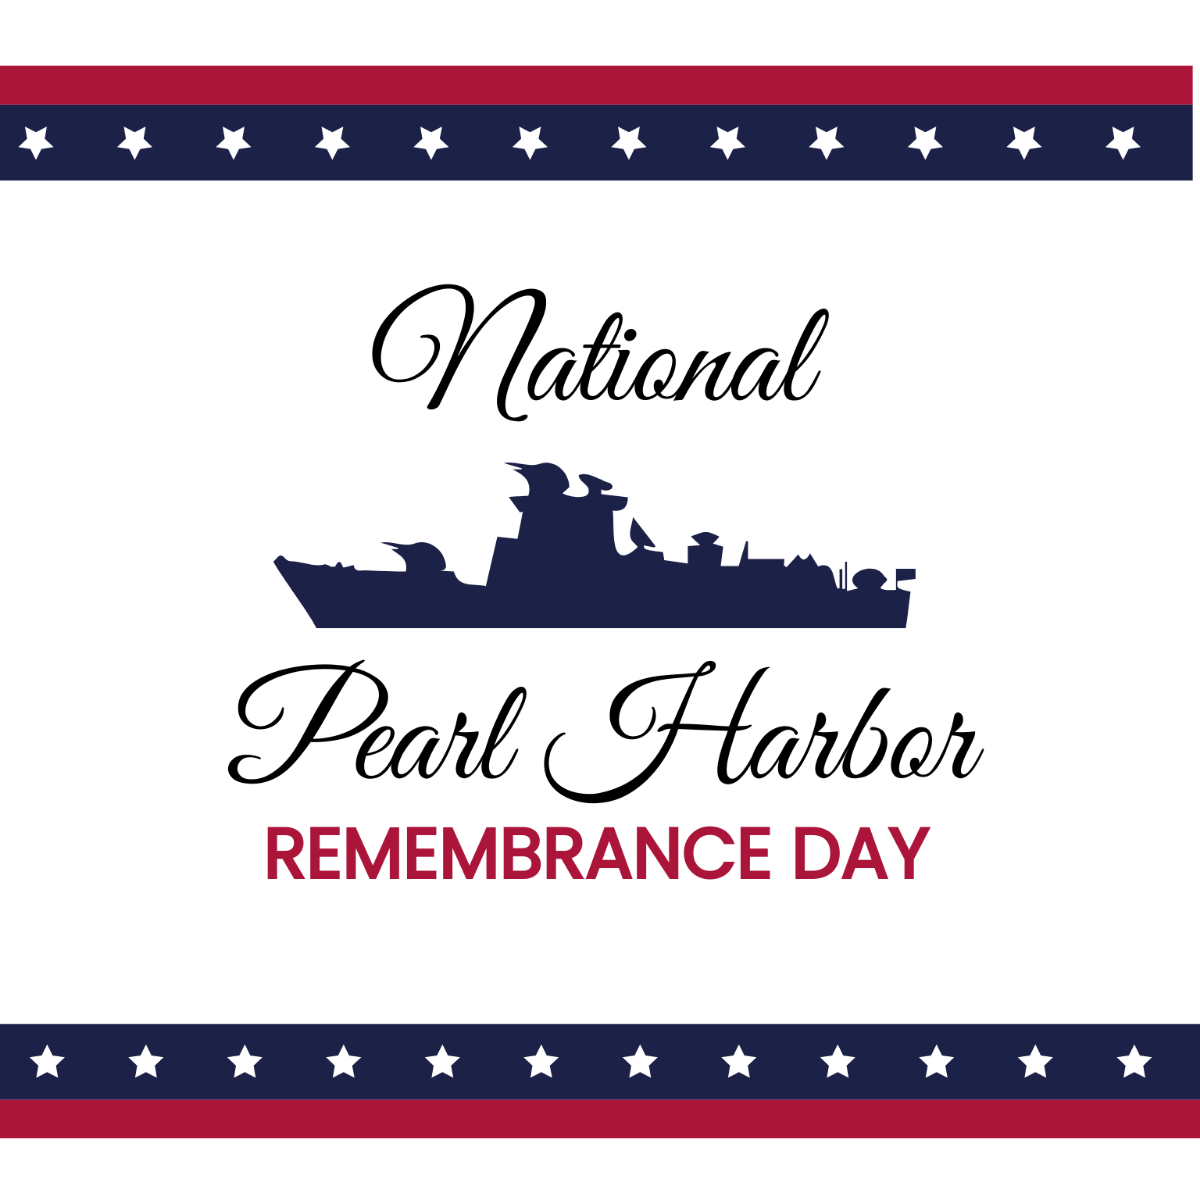 Free National Pearl Harbor Remembrance Day Clipart Vector Template